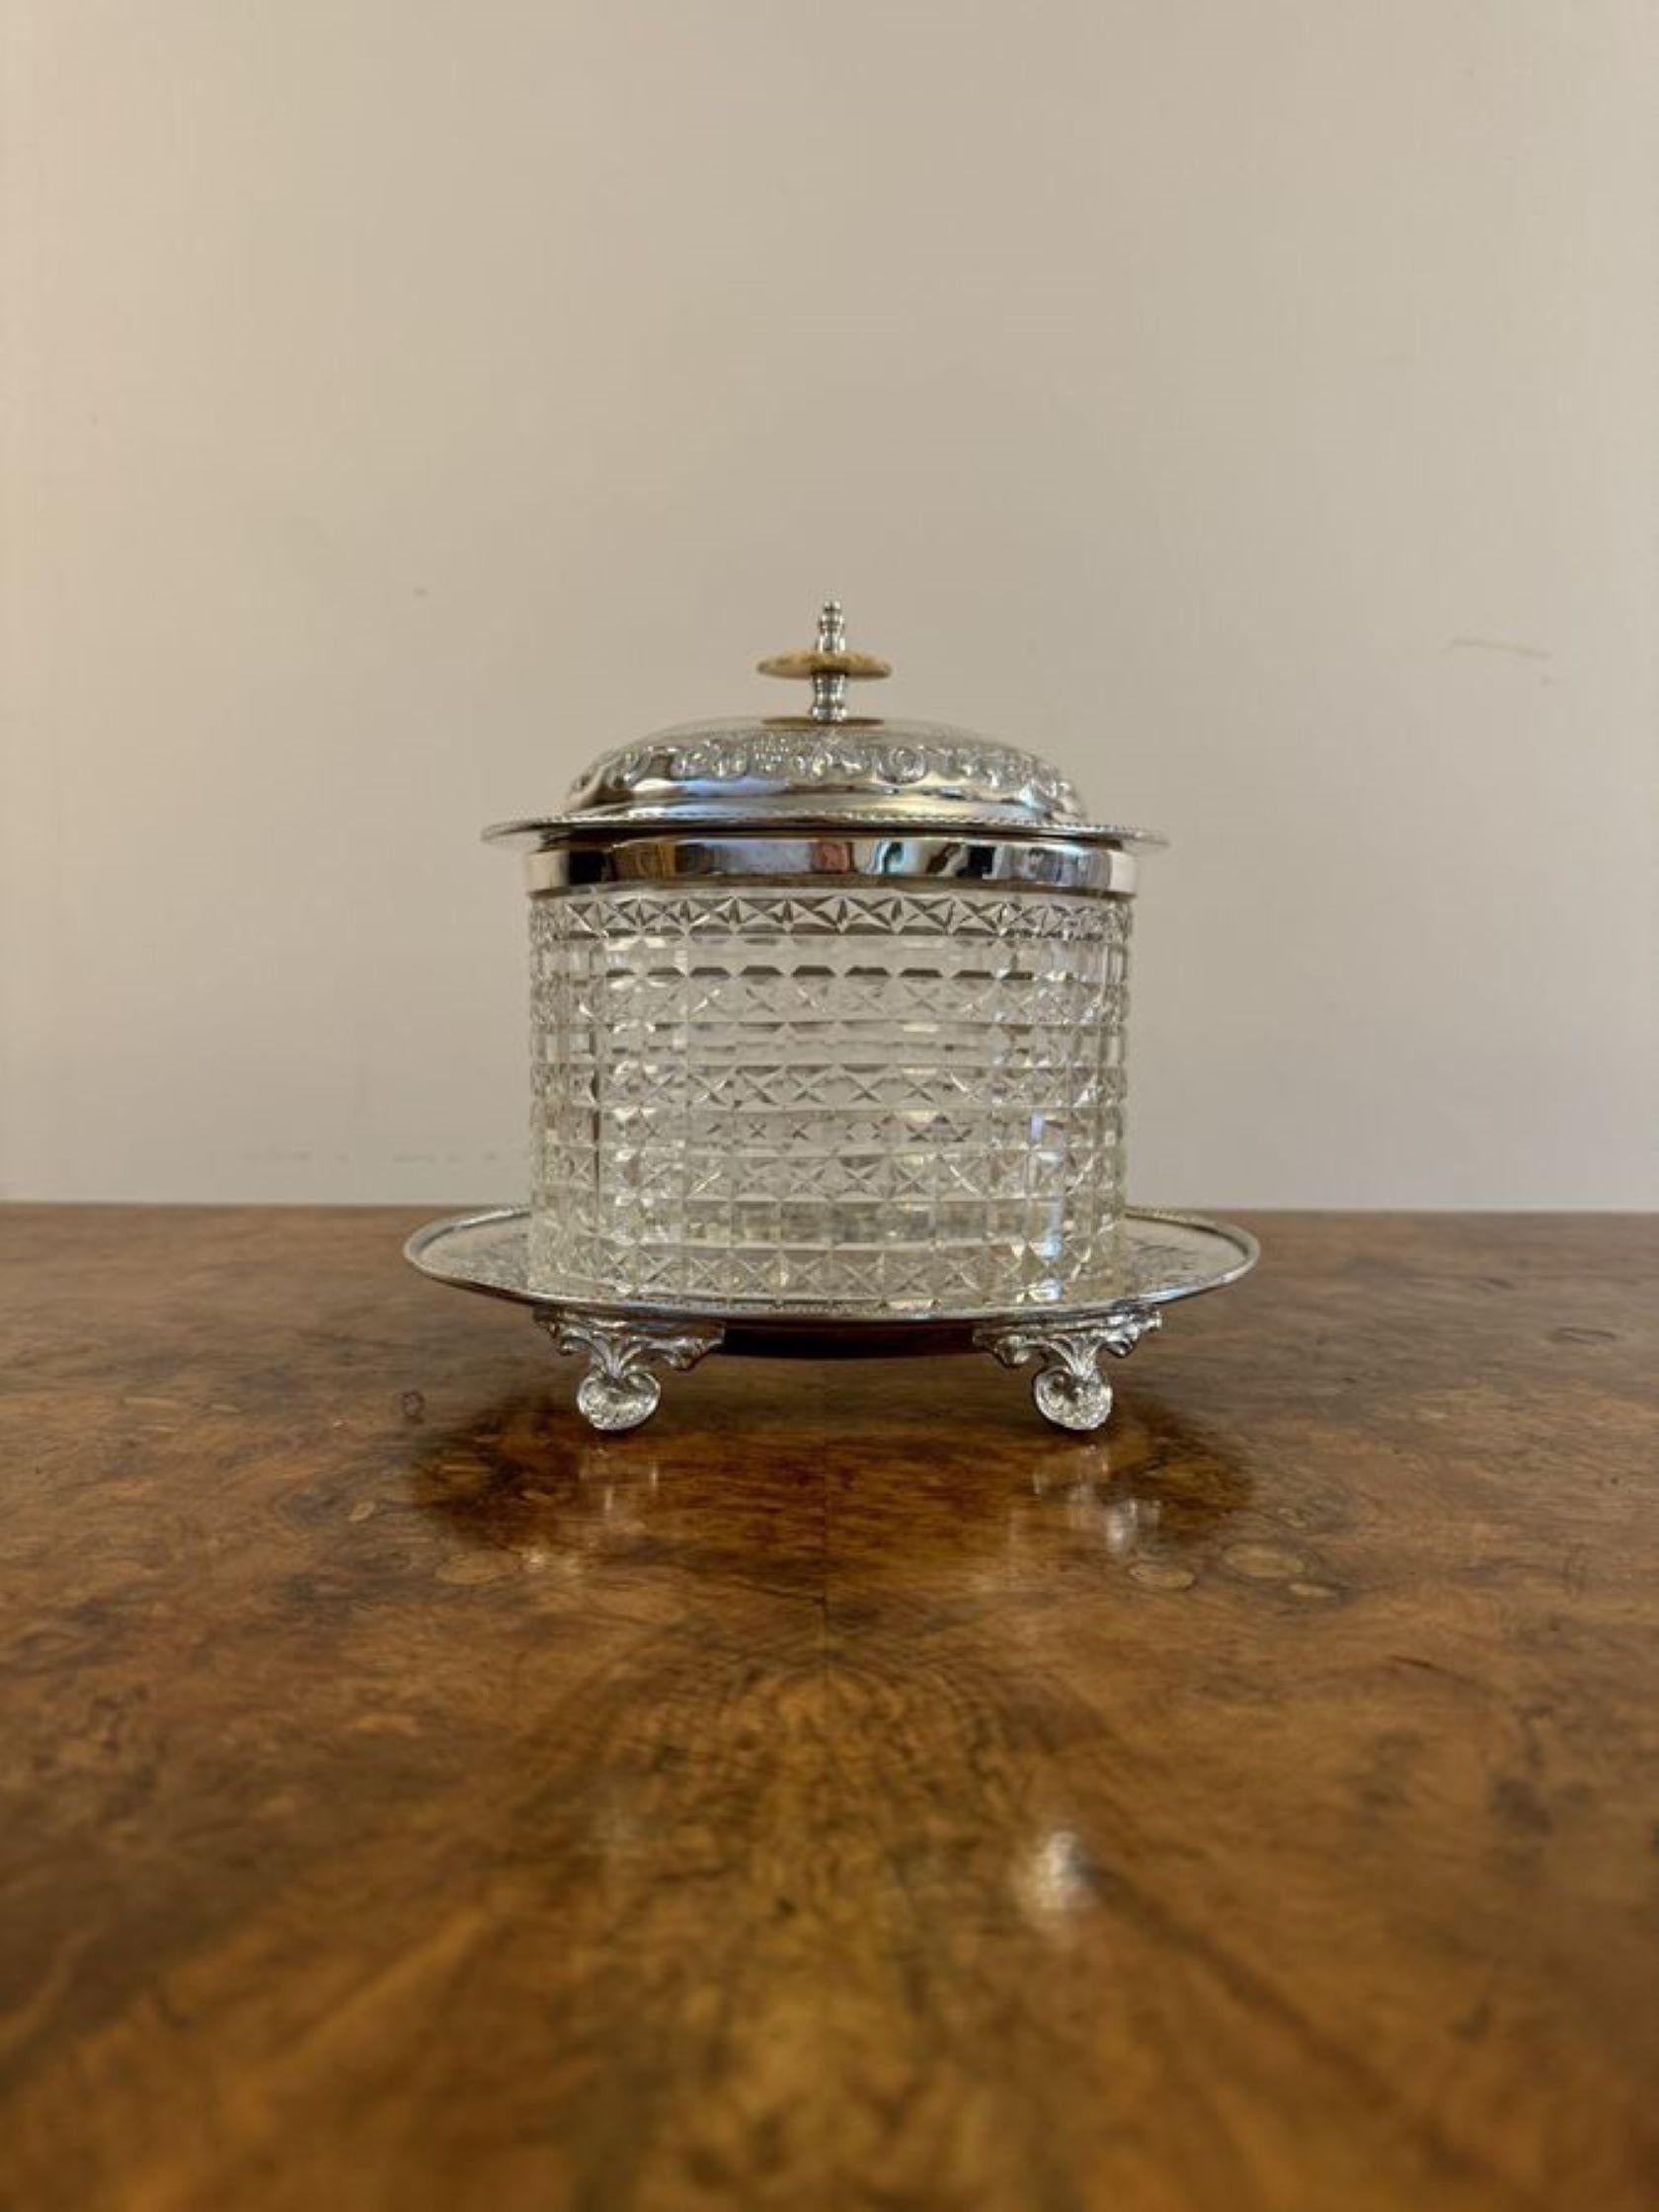 Wonderful quality antique Edwardian cut glass silver plated biscuit barrel, having a quality cut glass biscuit barrel with a silver plated rim and ornate silver plated lift off lid on an ornate silver plated stand raised on three shaped feet. 

D.